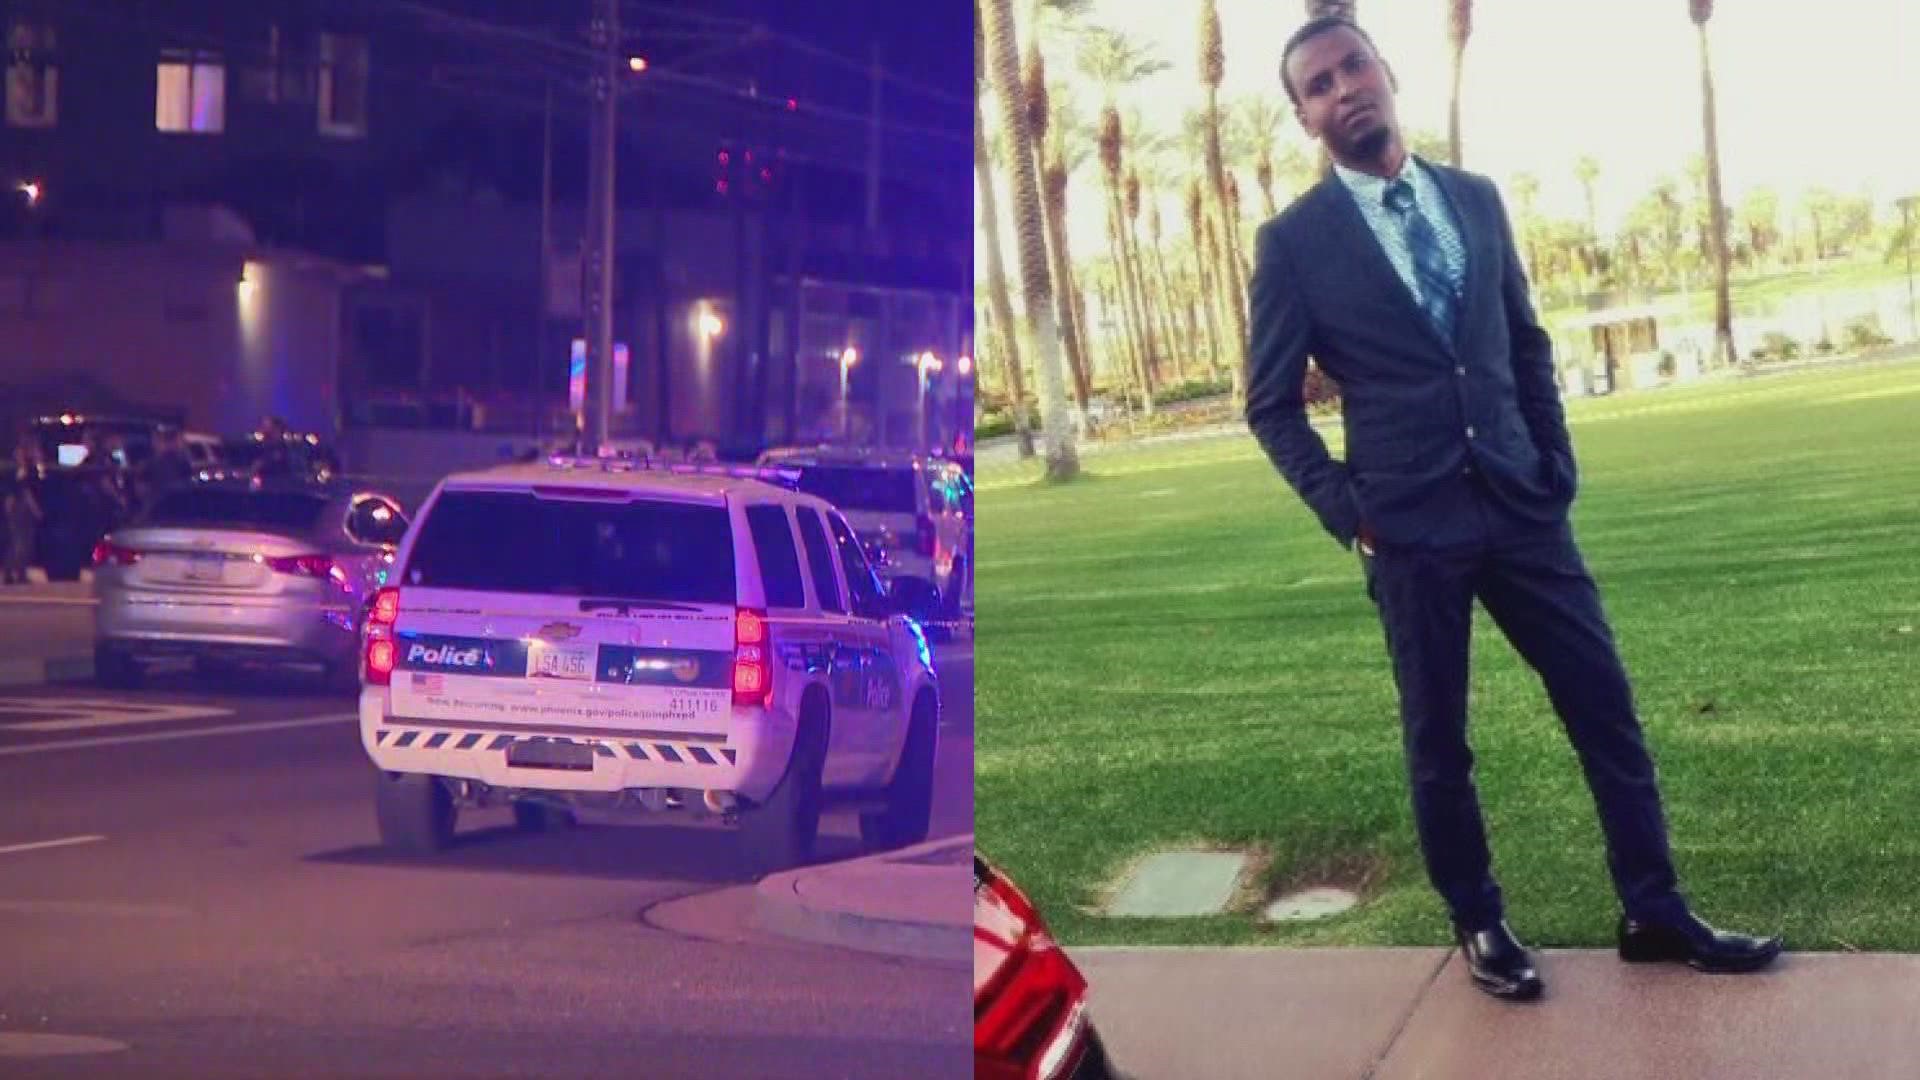 Ali Osman was killed in a shooting involving Phoenix police. His family is filing an excessive force and wrongful death lawsuit against the department.